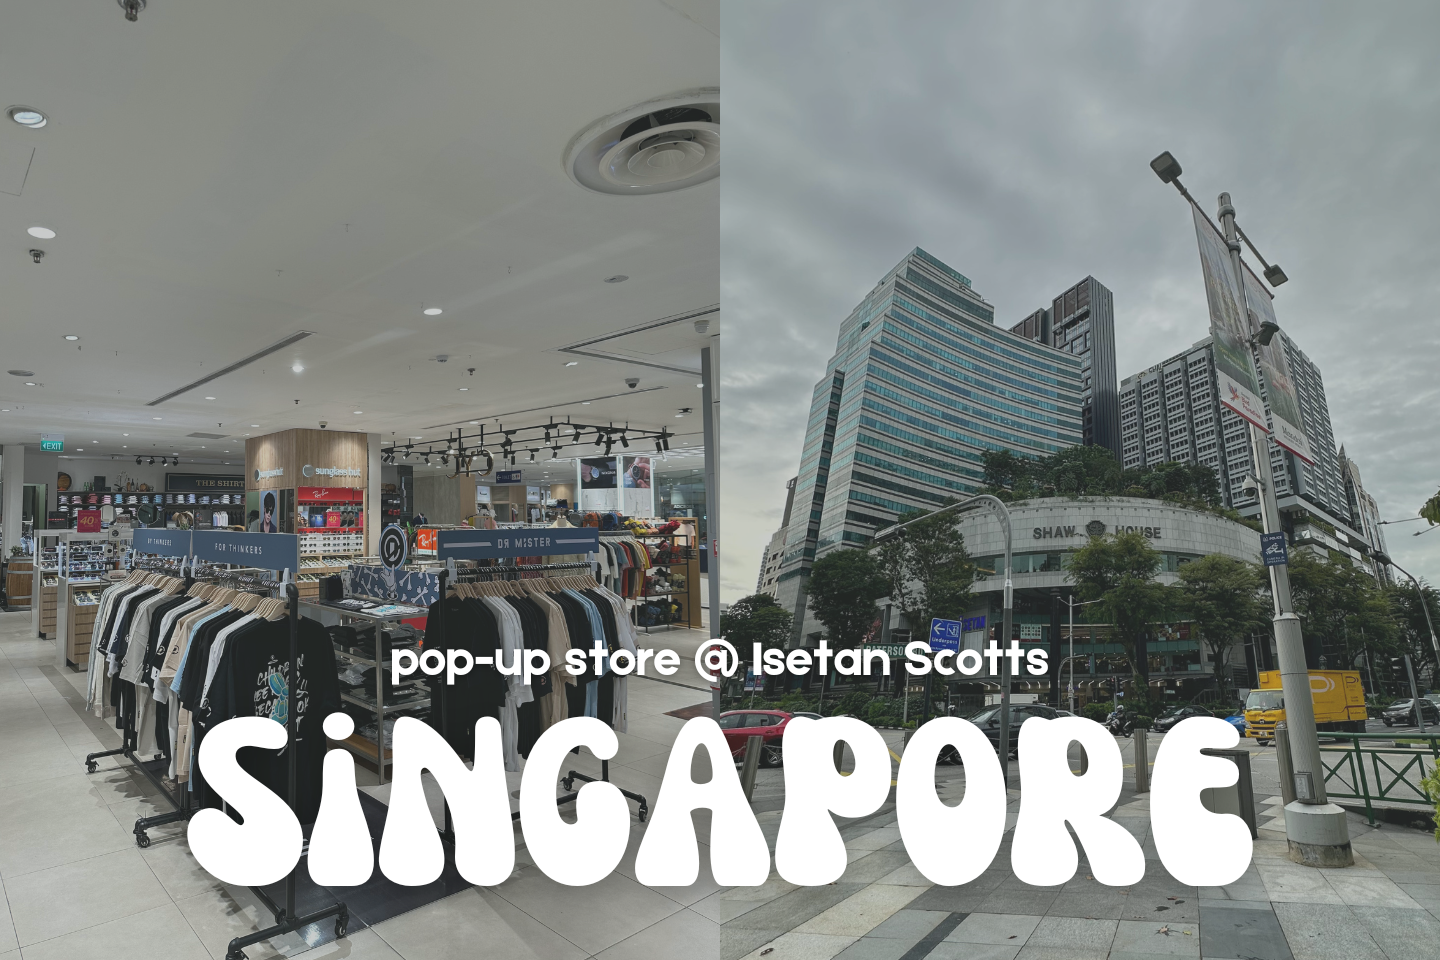 23 - Dr Mister has Landed in Singapore!